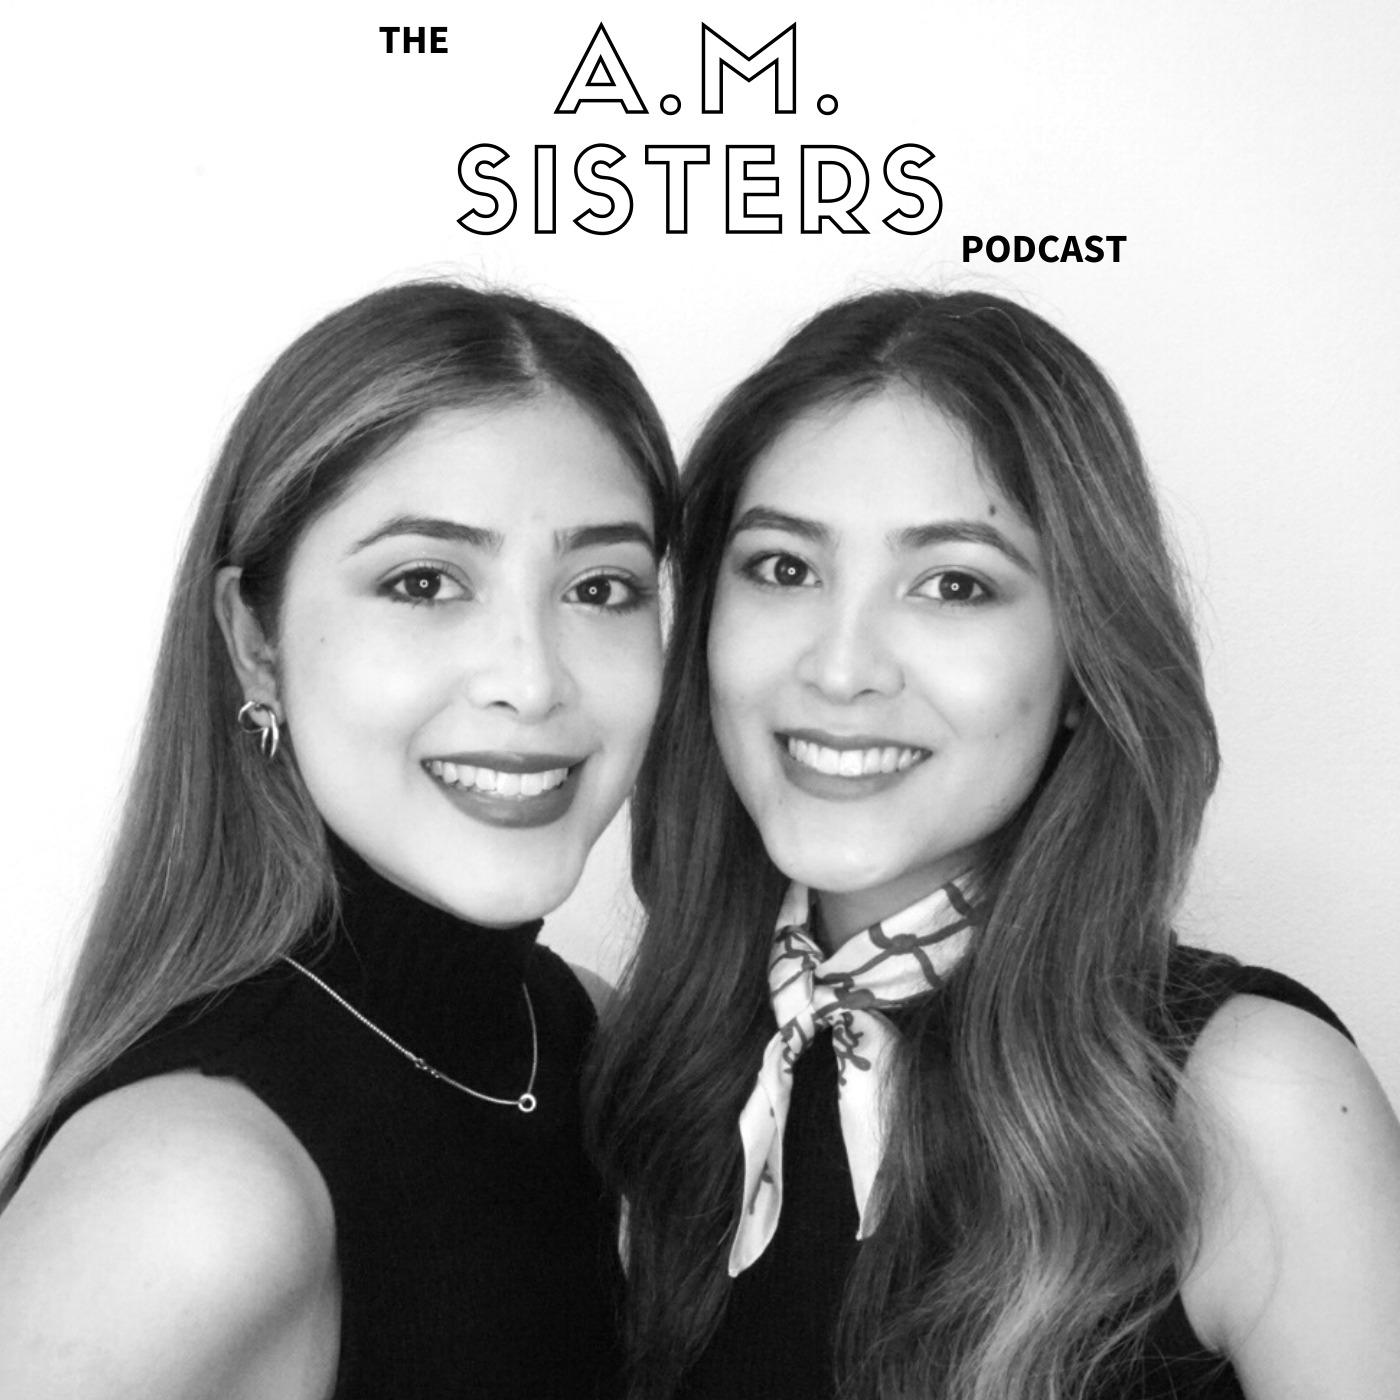 A.M. sisters Podcast